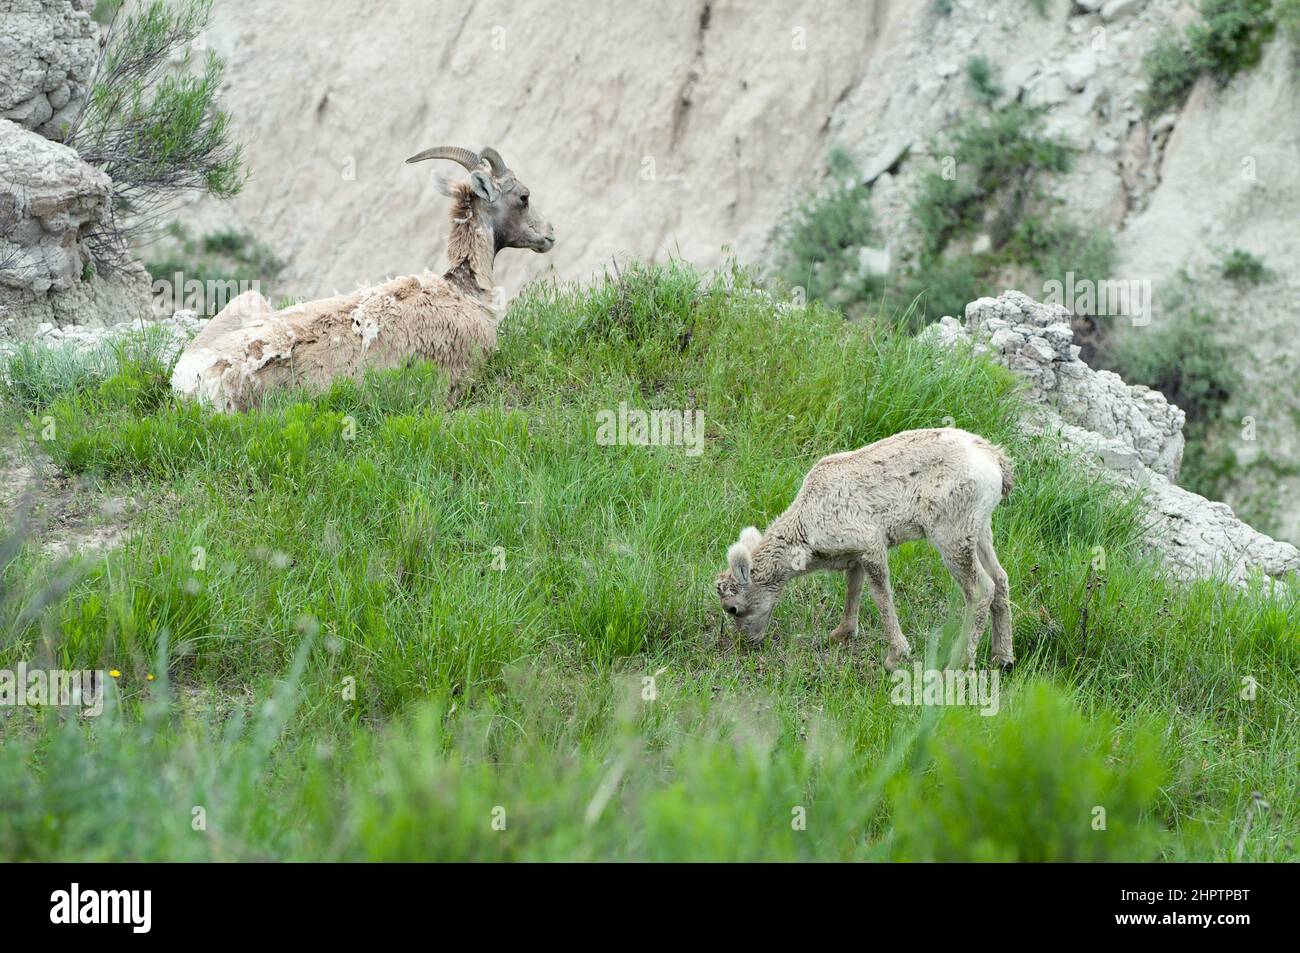 Wild Mountain Goats Resting along the Rocks in the Badlands National Park, South Dakota in the United States. Stock Photo